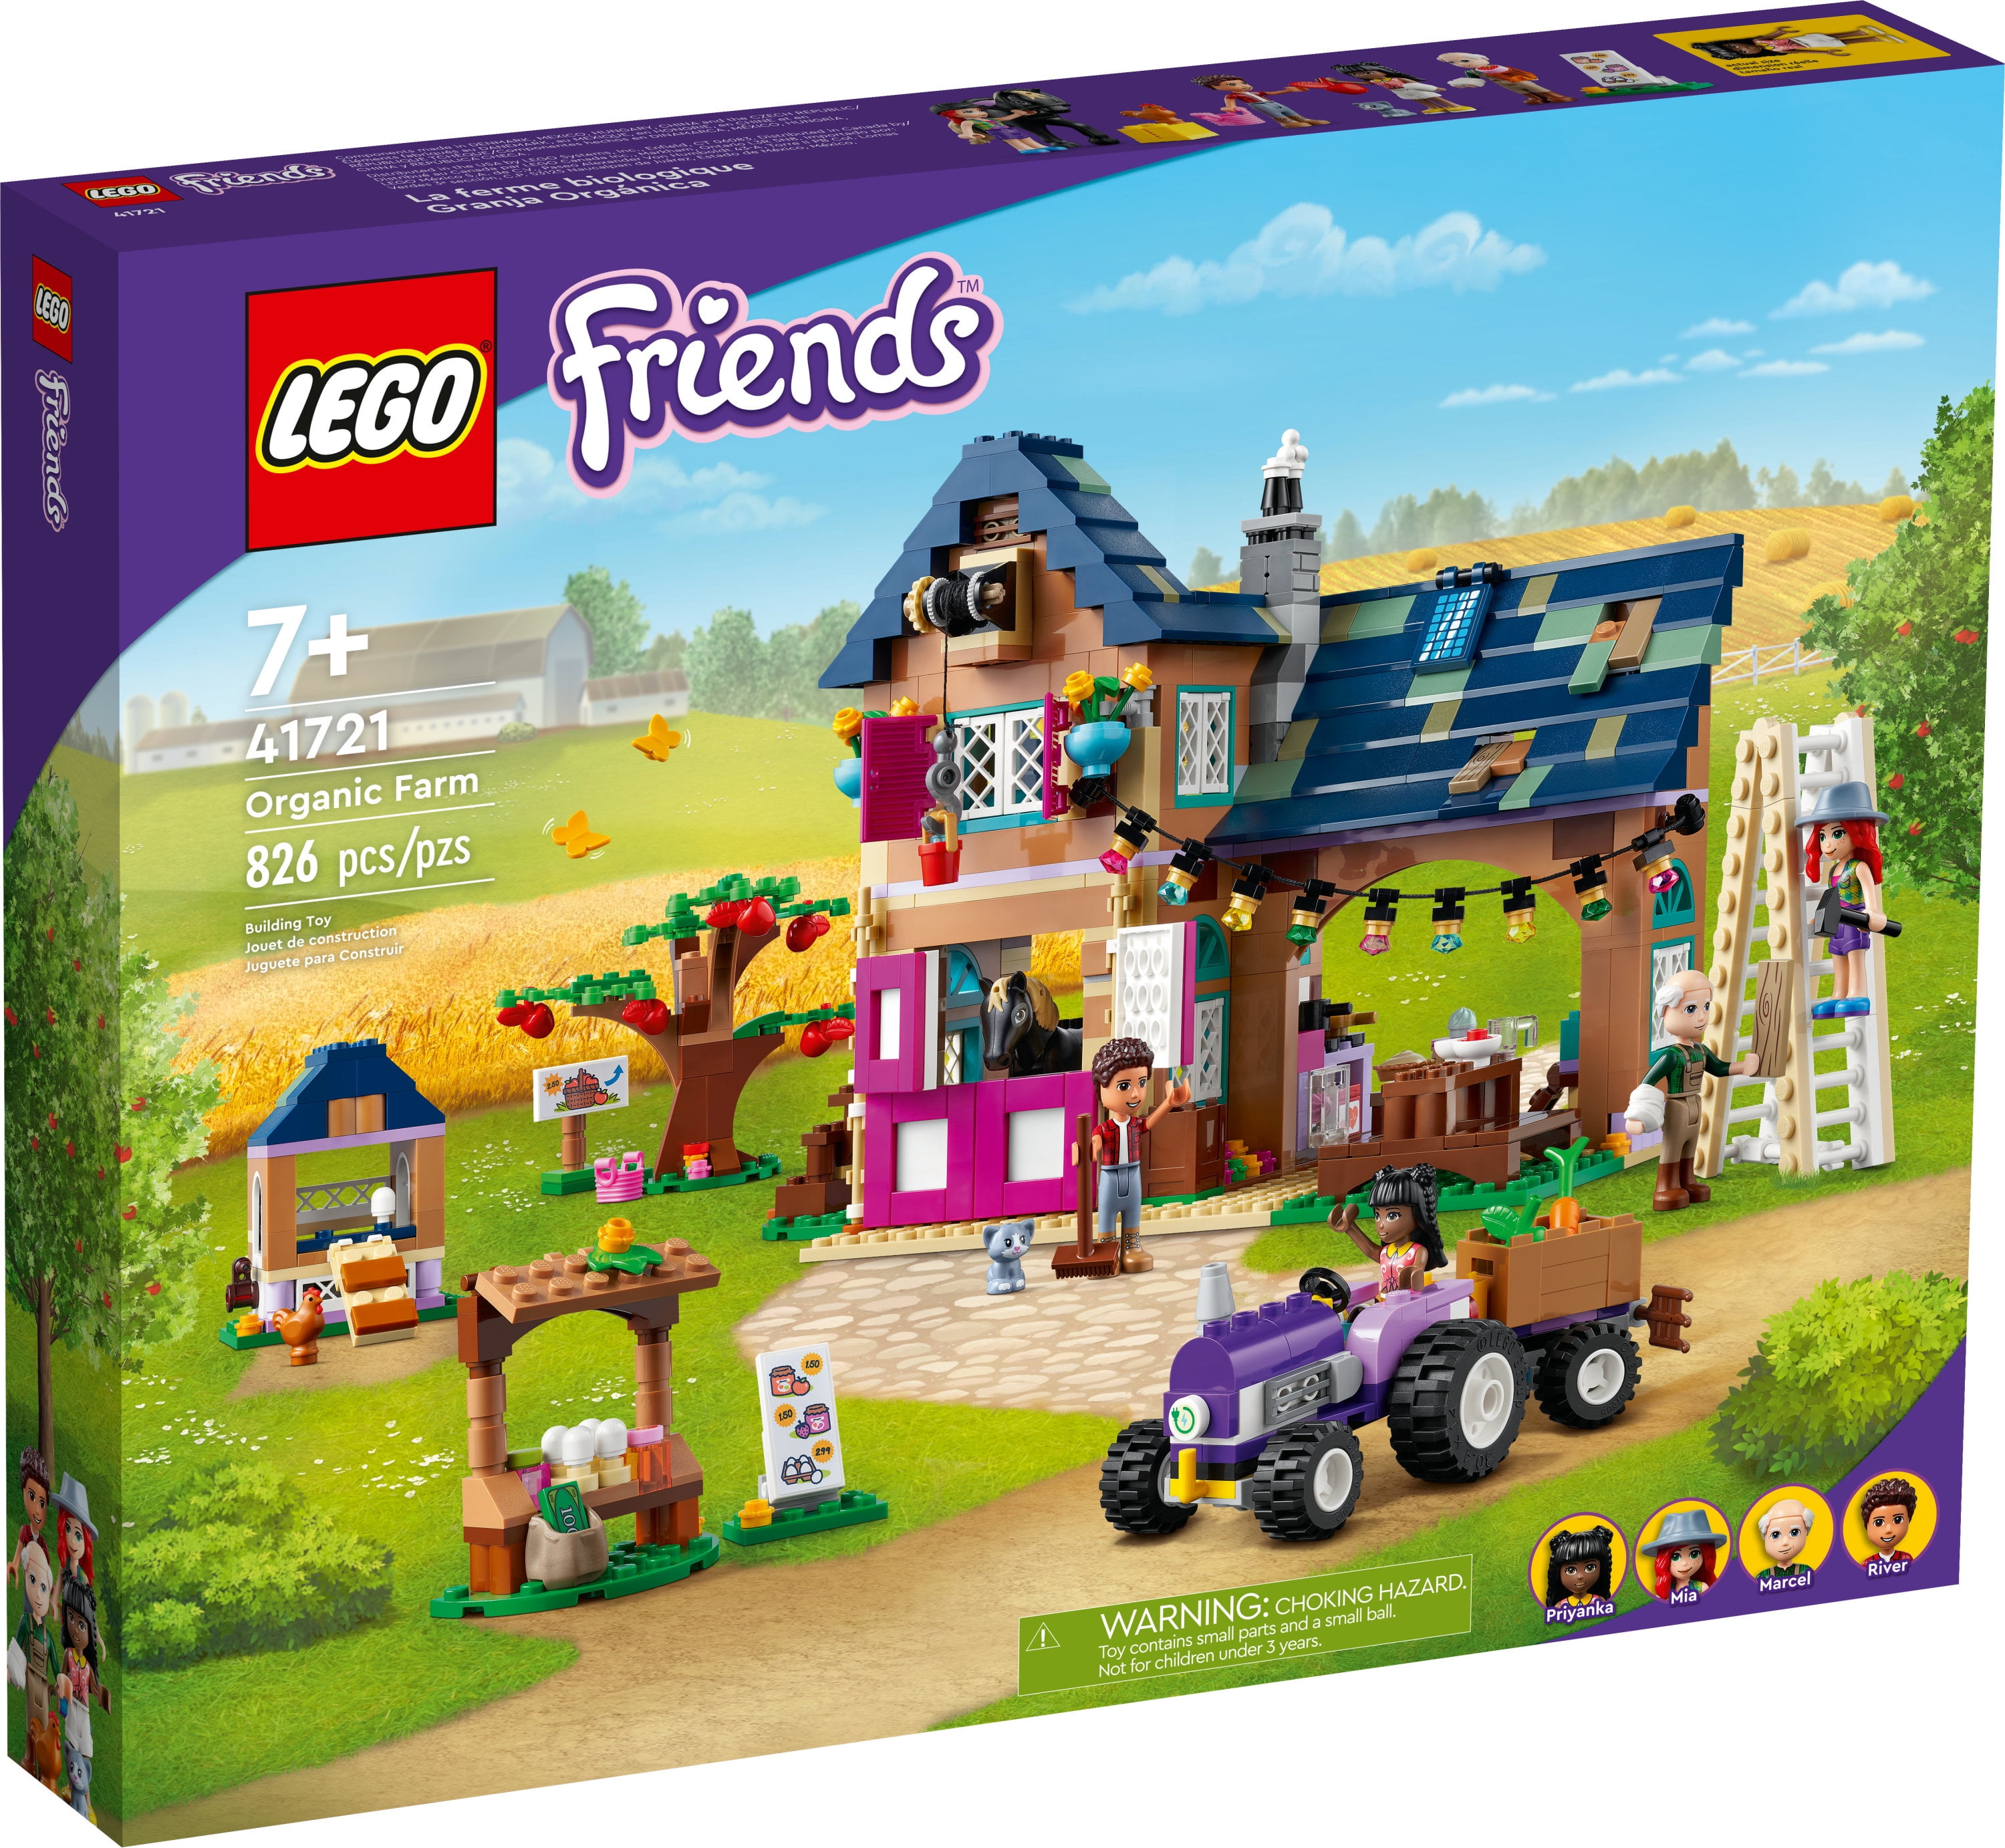 LEGO Friends Organic House Set 41721 with Toy Horse, Stable, Tractor and Trailer Animal Figures, for Kids, Girls and Boys Aged 7+ - Walmart.com